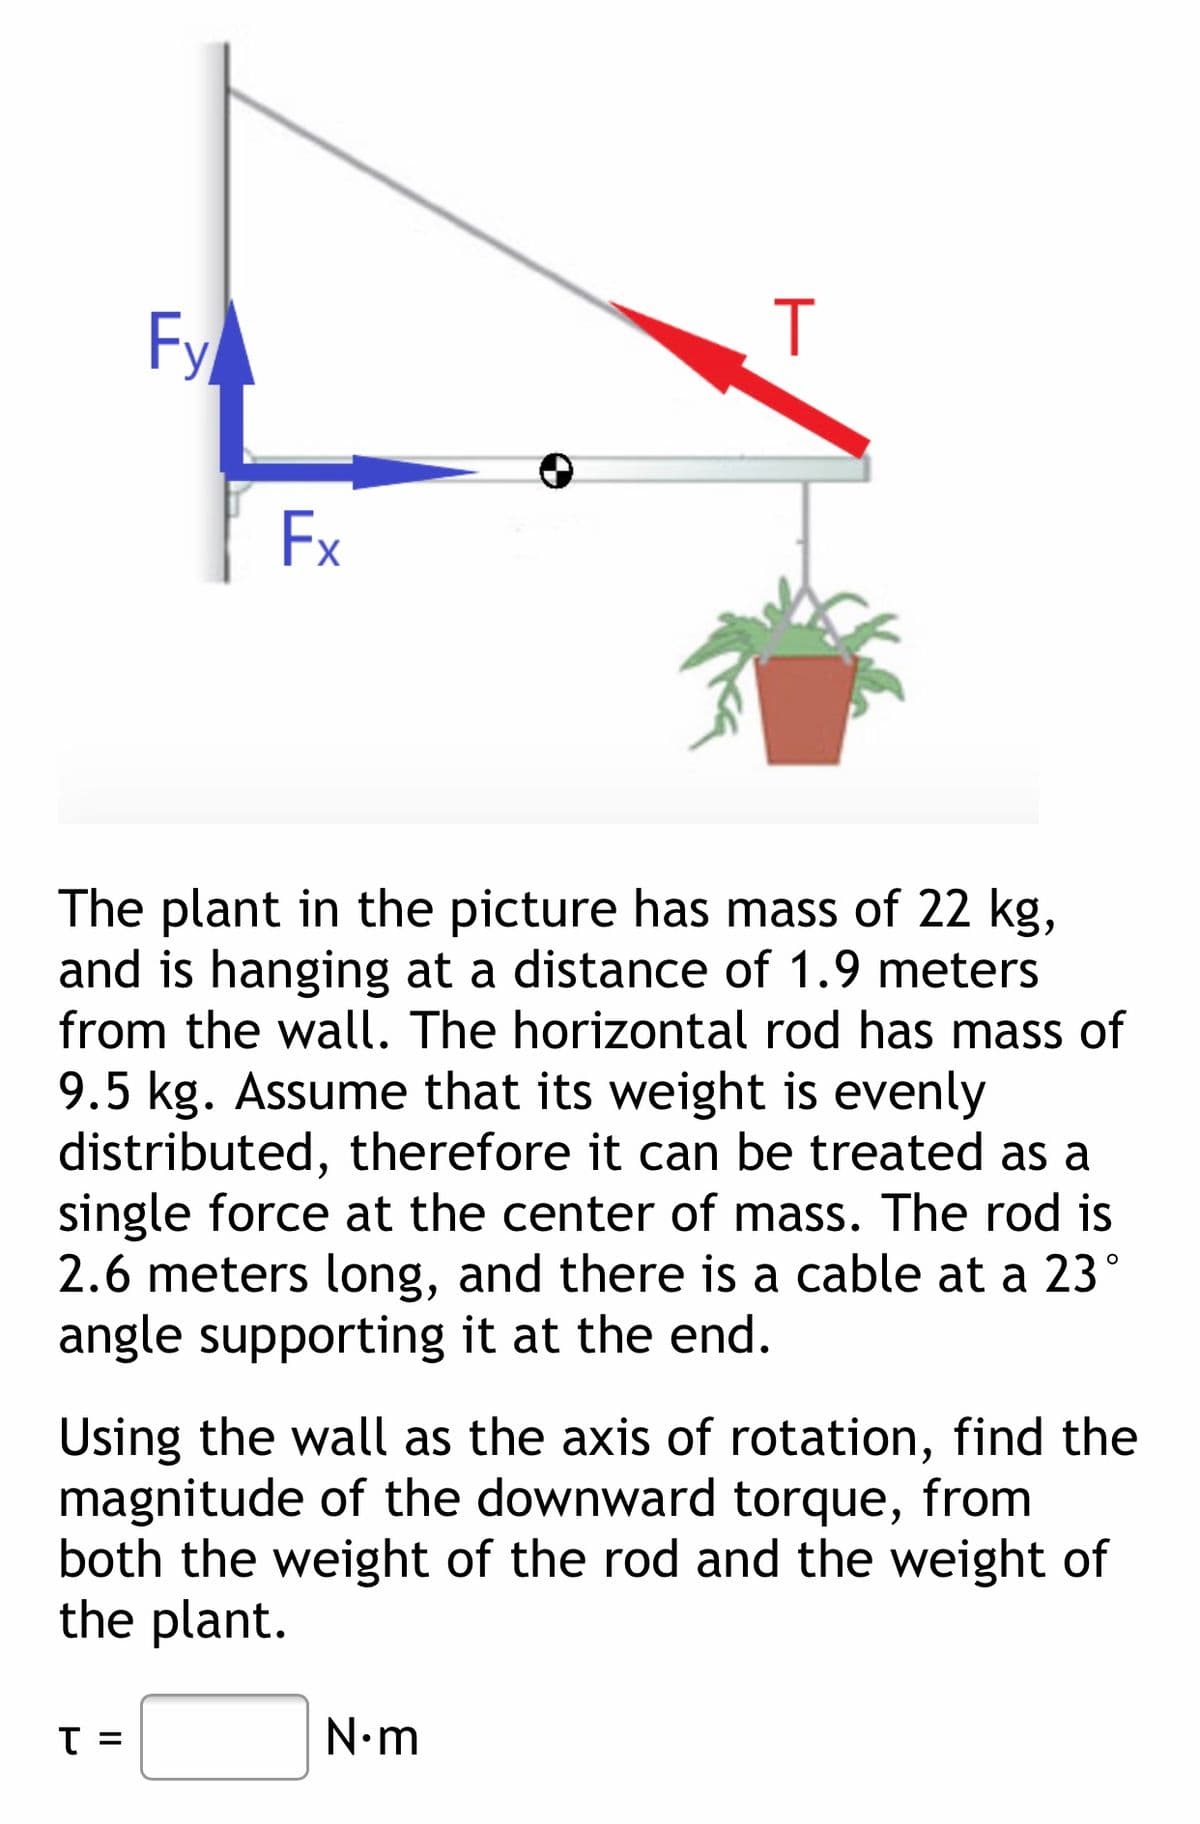 Fy
Ex
The plant in the picture has mass of 22 kg,
and is hanging at a distance of 1.9 meters
from the wall. The horizontal rod has mass of
9.5 kg. Assume that its weight is evenly
distributed, therefore it can be treated as a
single force at the center of mass. The rod is
2.6 meters long, and there is a cable at a 23°
angle supporting it at the end.
Using the wall as the axis of rotation, find the
magnitude of the downward torque, from
both the weight of the rod and the weight of
the plant.
T =
N•m
